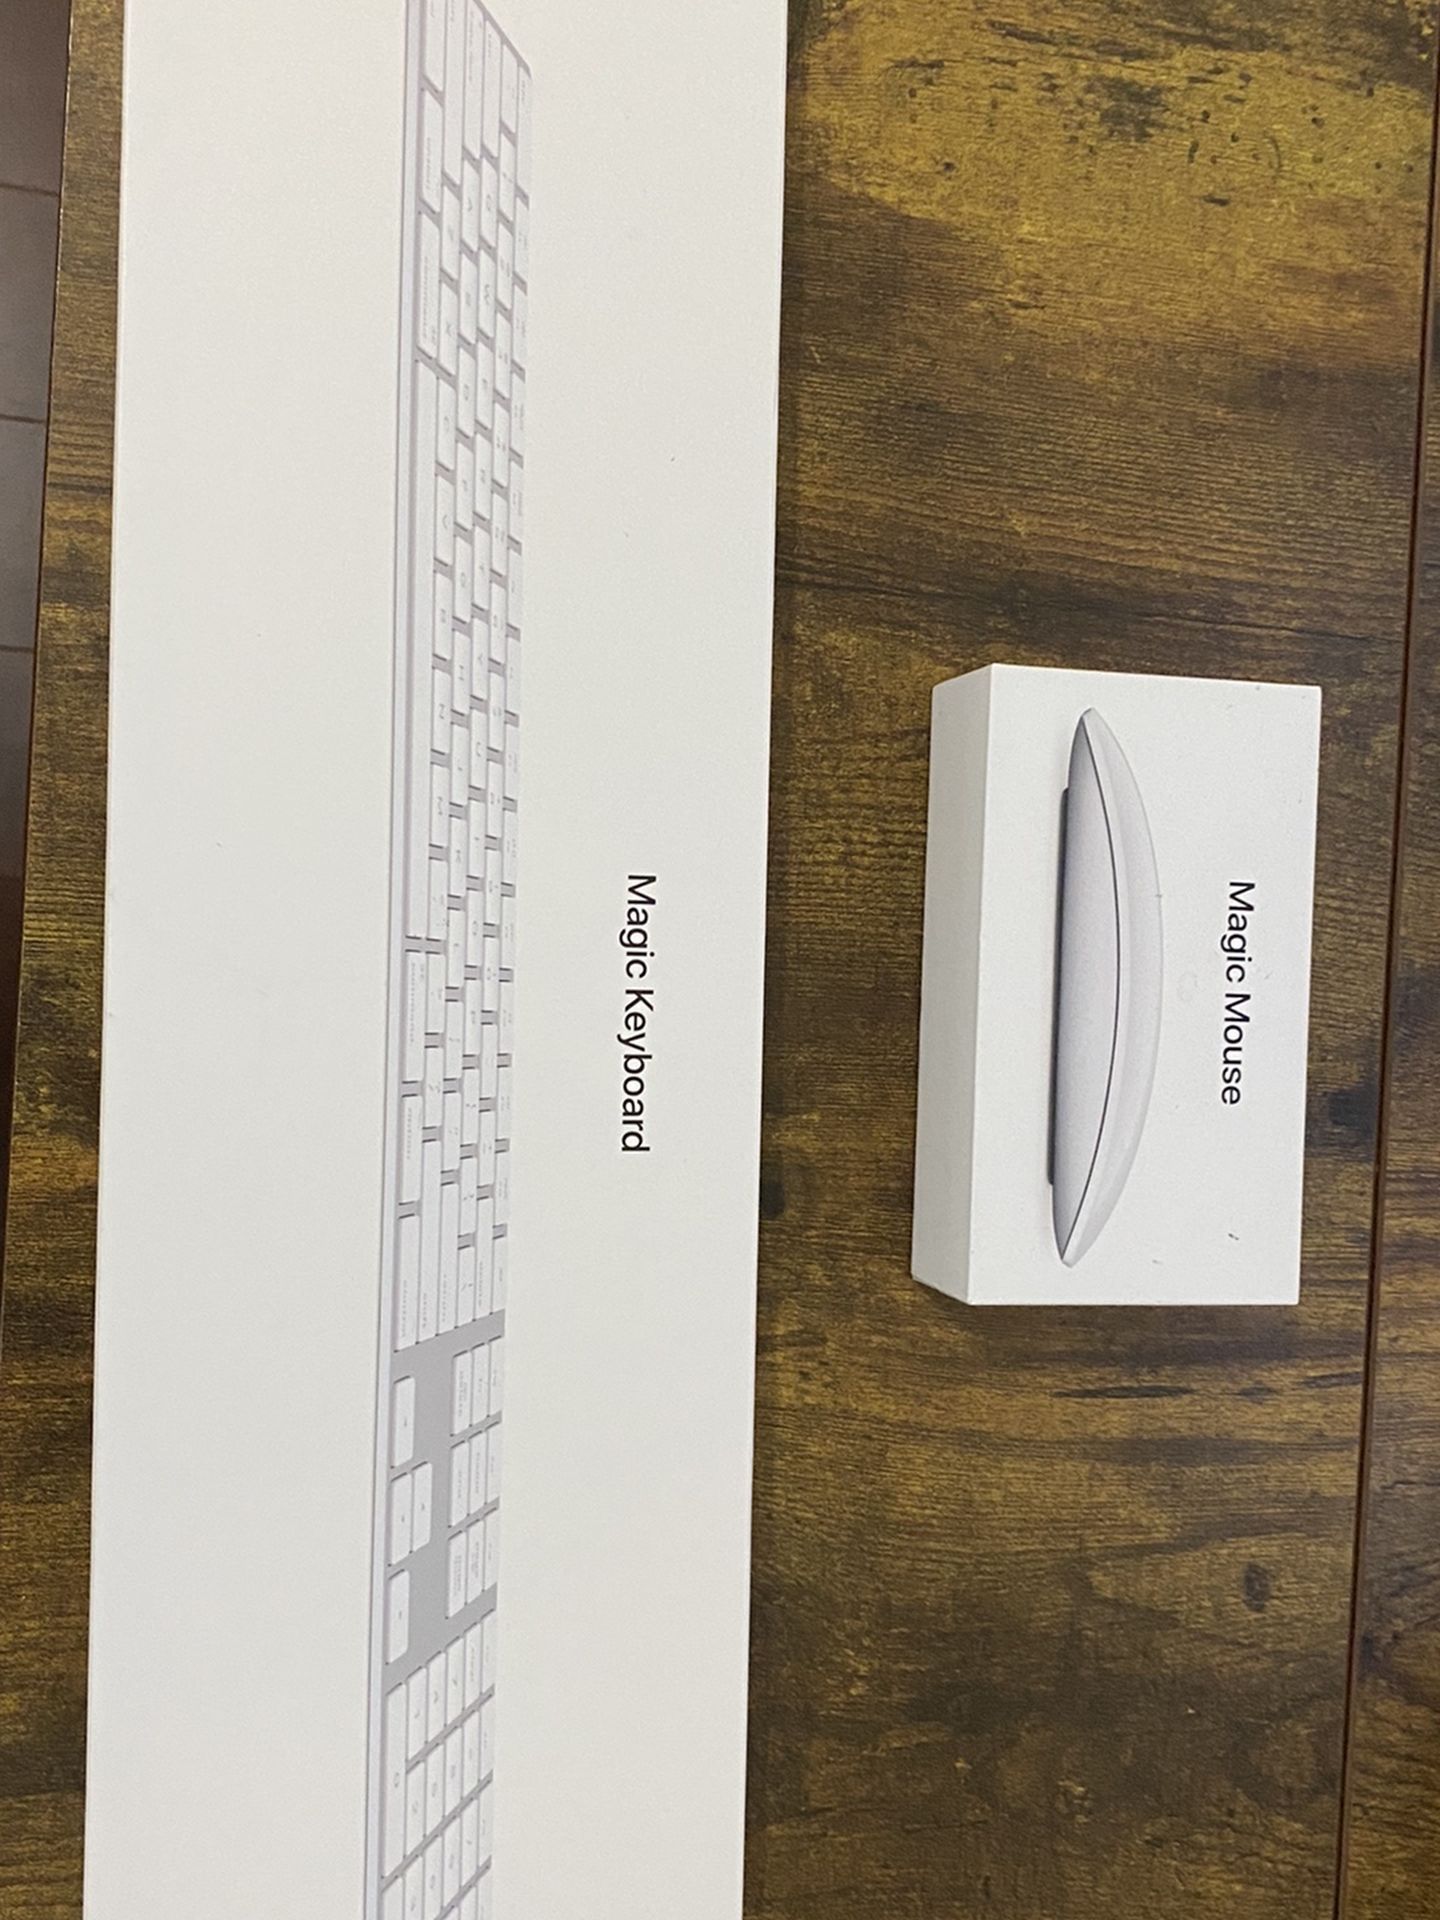 Magic Mouse 2 and Keyboard for Sale.